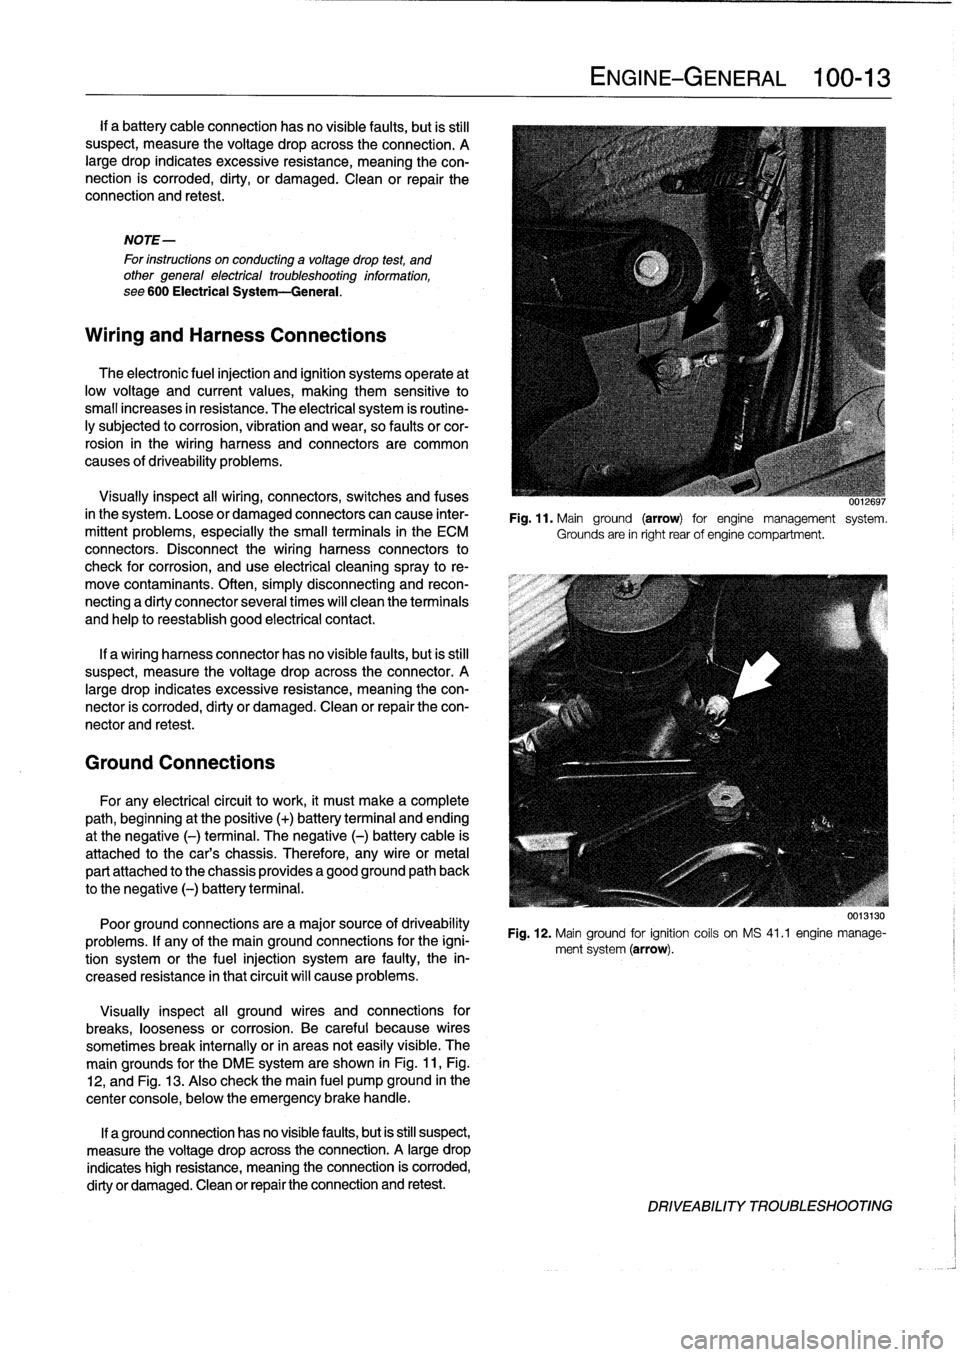 BMW 318i 1997 E36 Workshop Manual 
If
a
battery
cableconnection
hasno
visible
faults,
but
is
still
suspect,
measure
the
voltage
drop
across
the
connection
.
A
large
drop
indicates
excessive
resistance,
meaning
the
con-
nection
is
corr